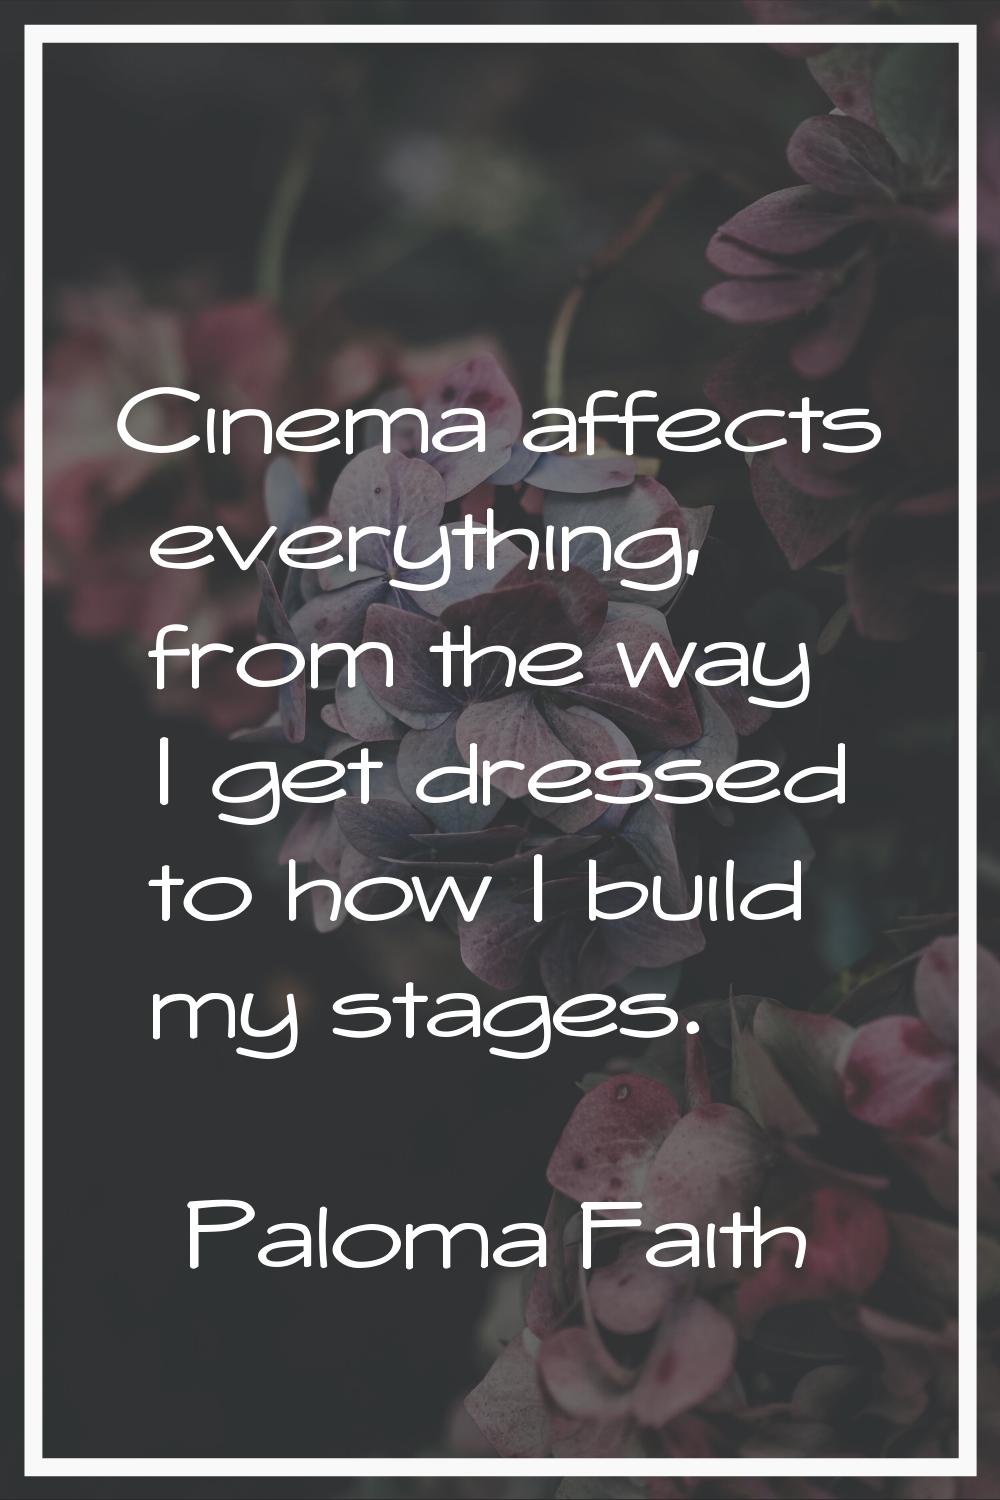 Cinema affects everything, from the way I get dressed to how I build my stages.